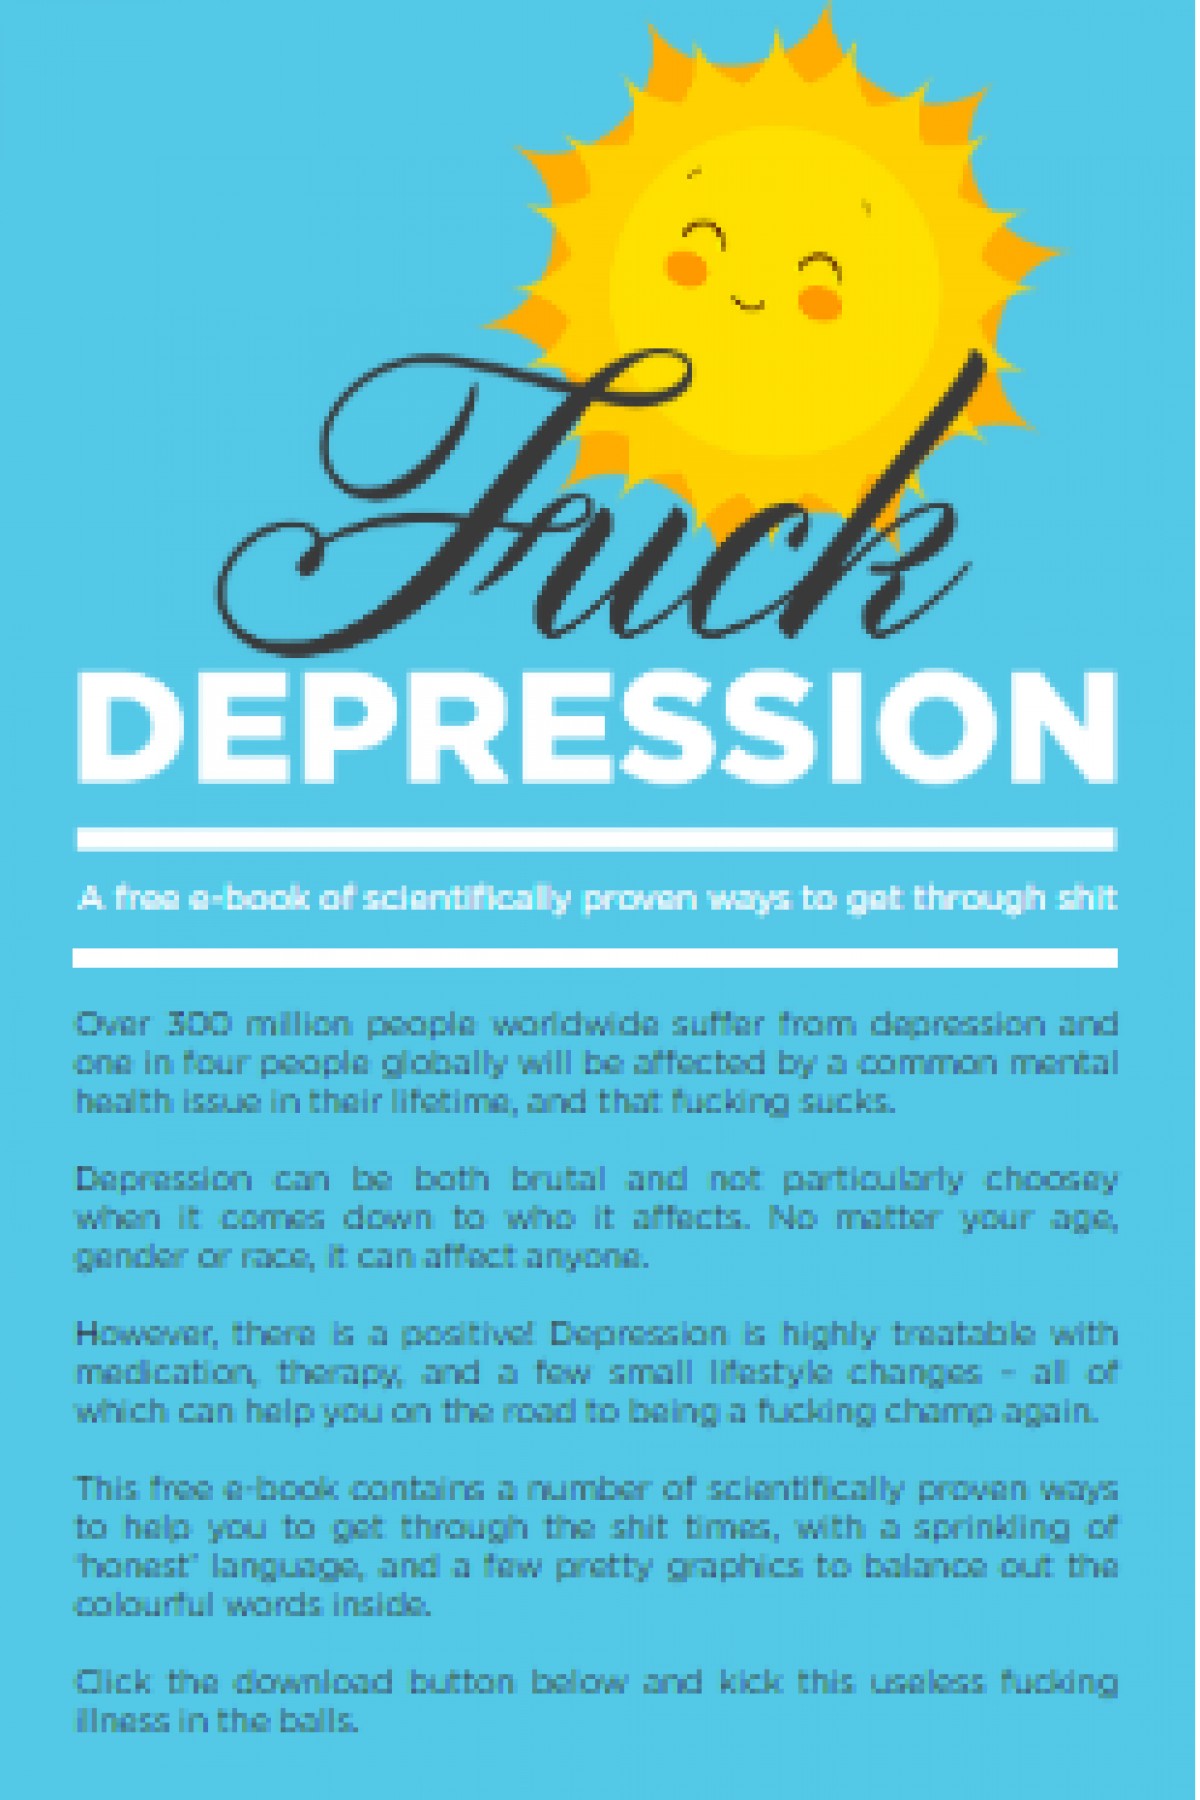 Fuck depression: A free e-book of scientifically proven ways to get through shit